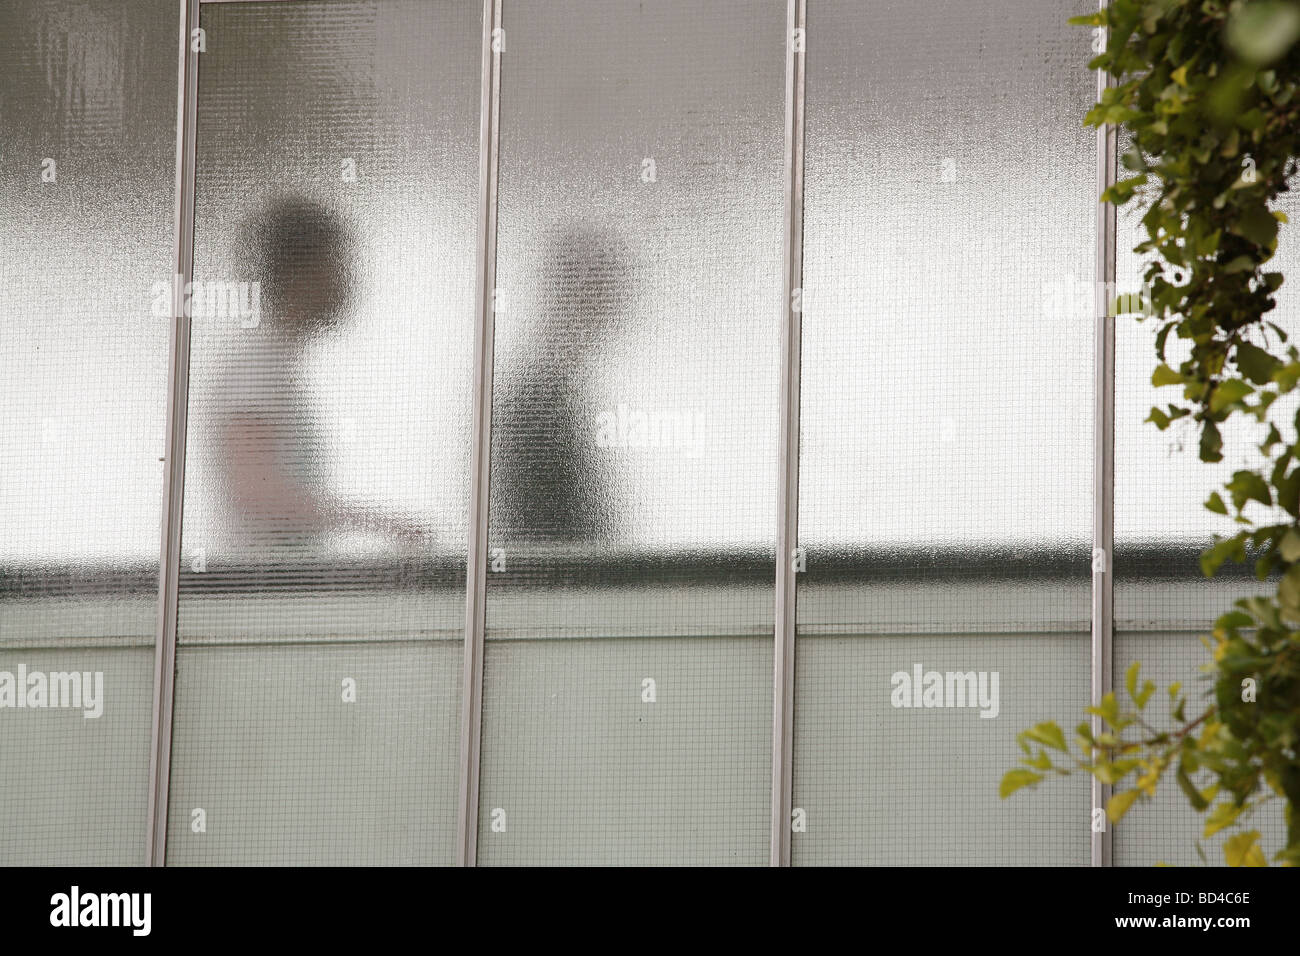 diffuse outlines of people walking behind glass Stock Photo